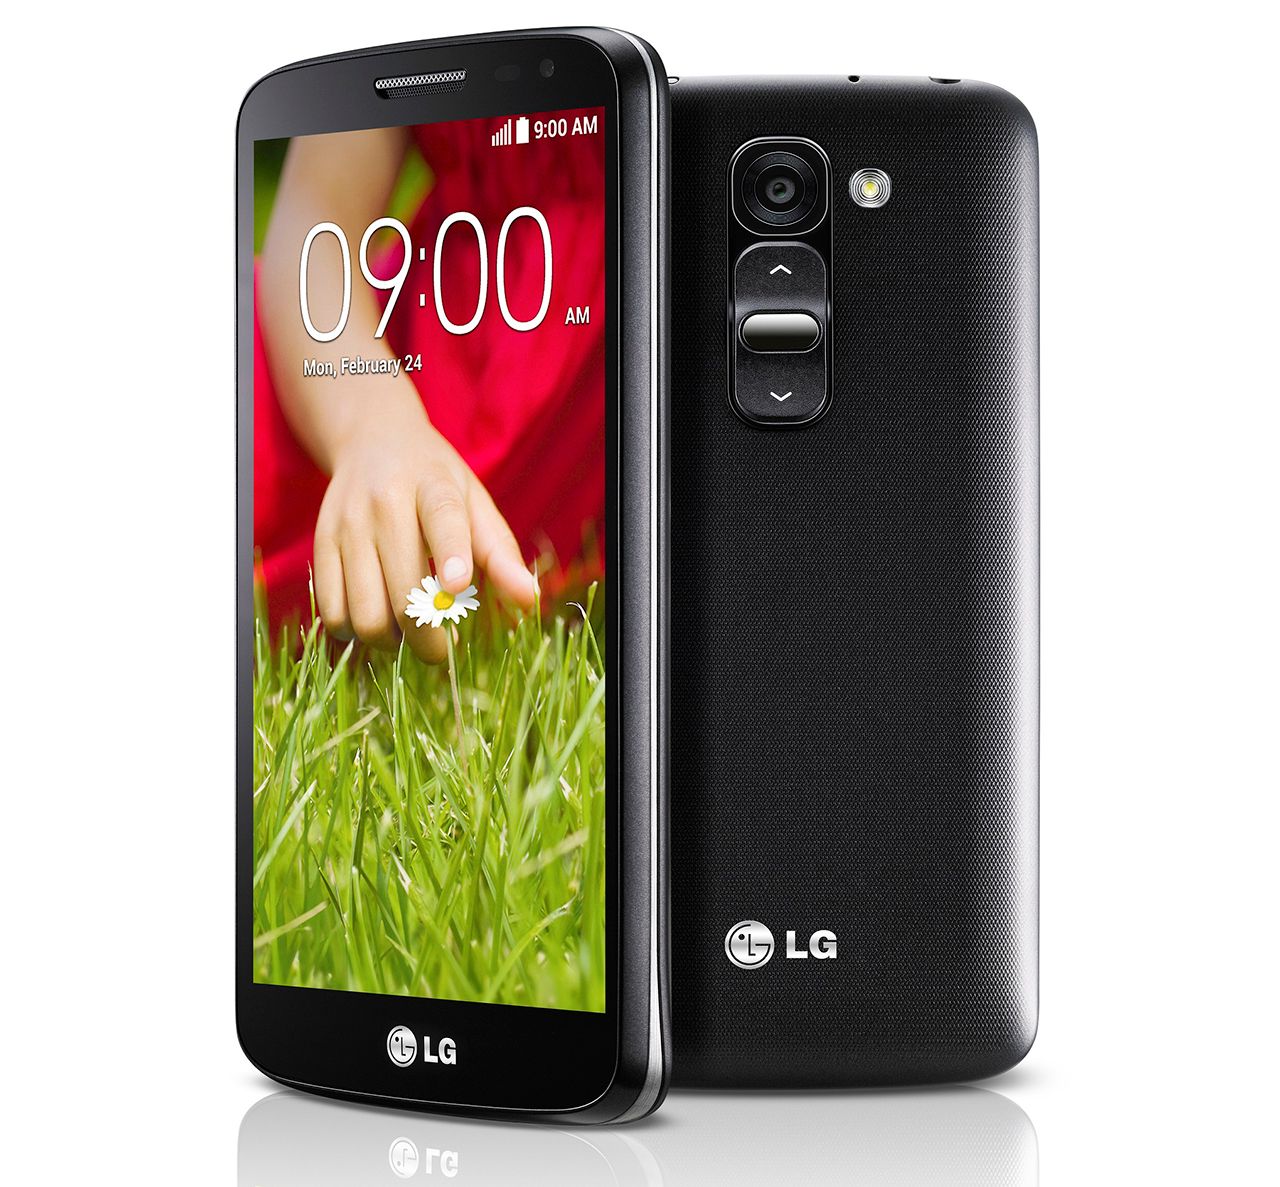 lg g2 mini global rollout starts in march coming to uk too update image 3